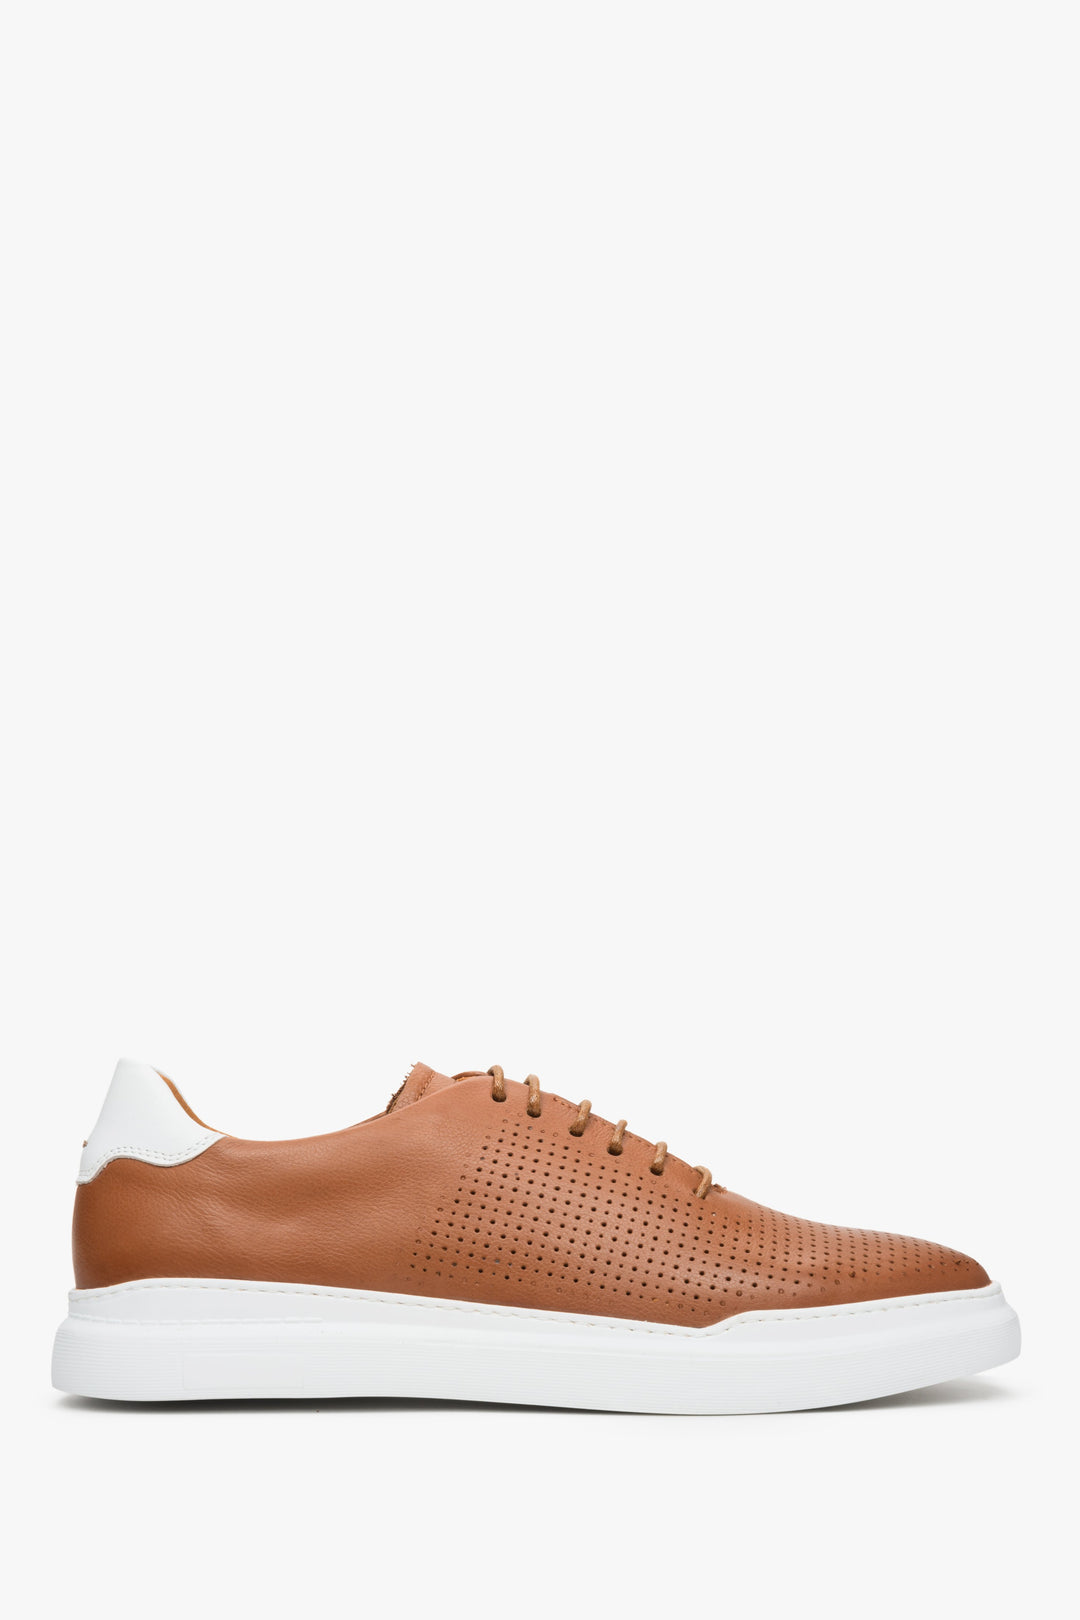 Brown Perforated Men's Leather Sneakers with Rubber Sole Estro ER00112917